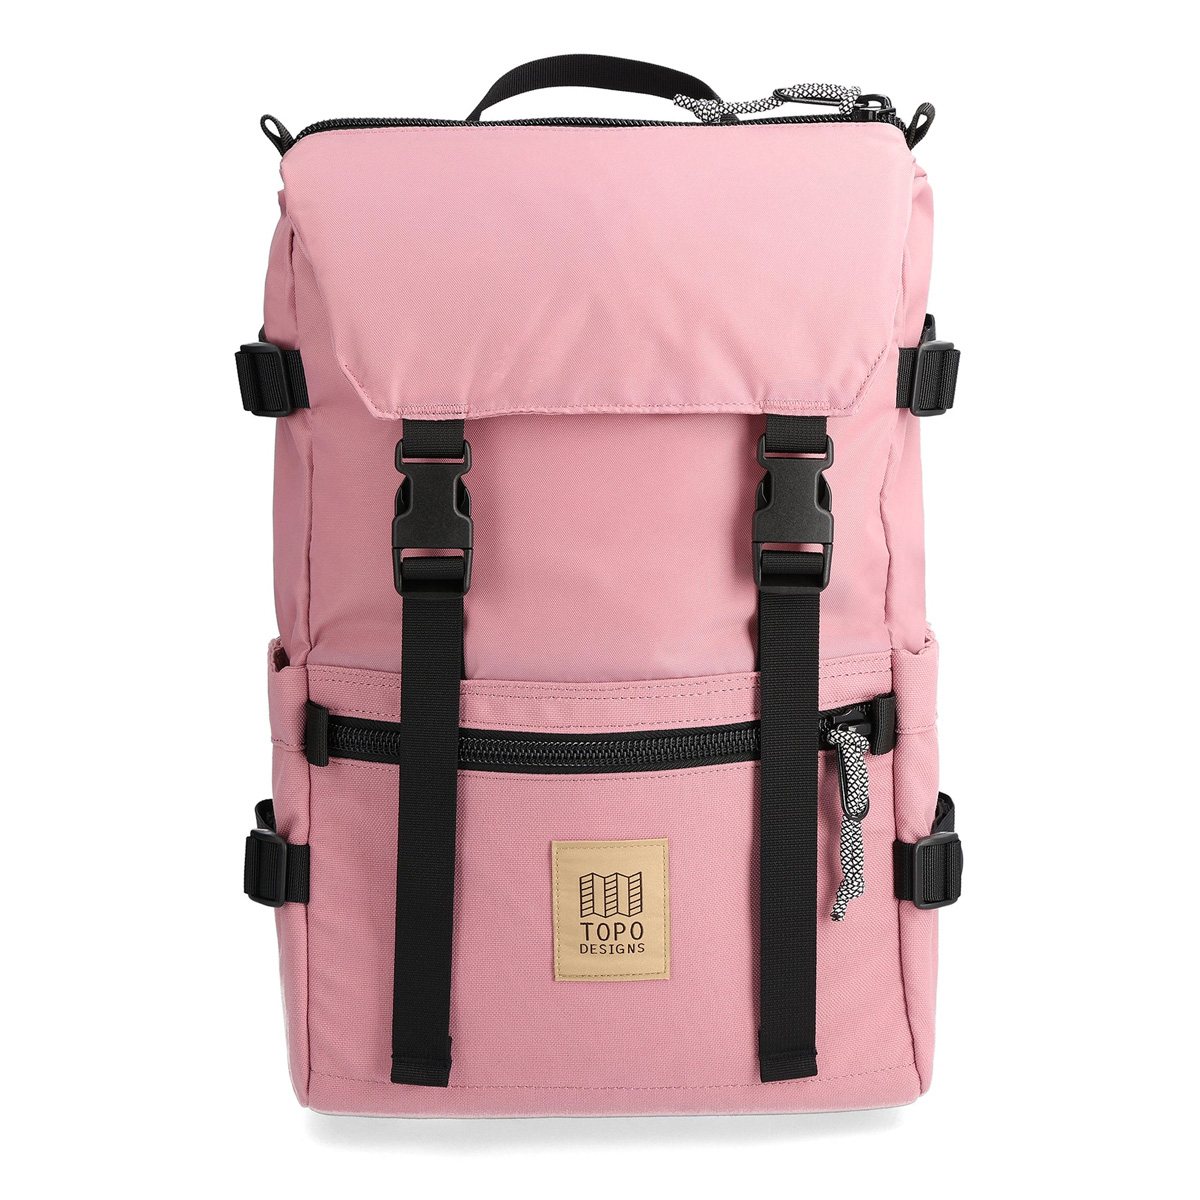 Topo Designs Rover Pack Classic Rose, timeless backpack with great functionalities